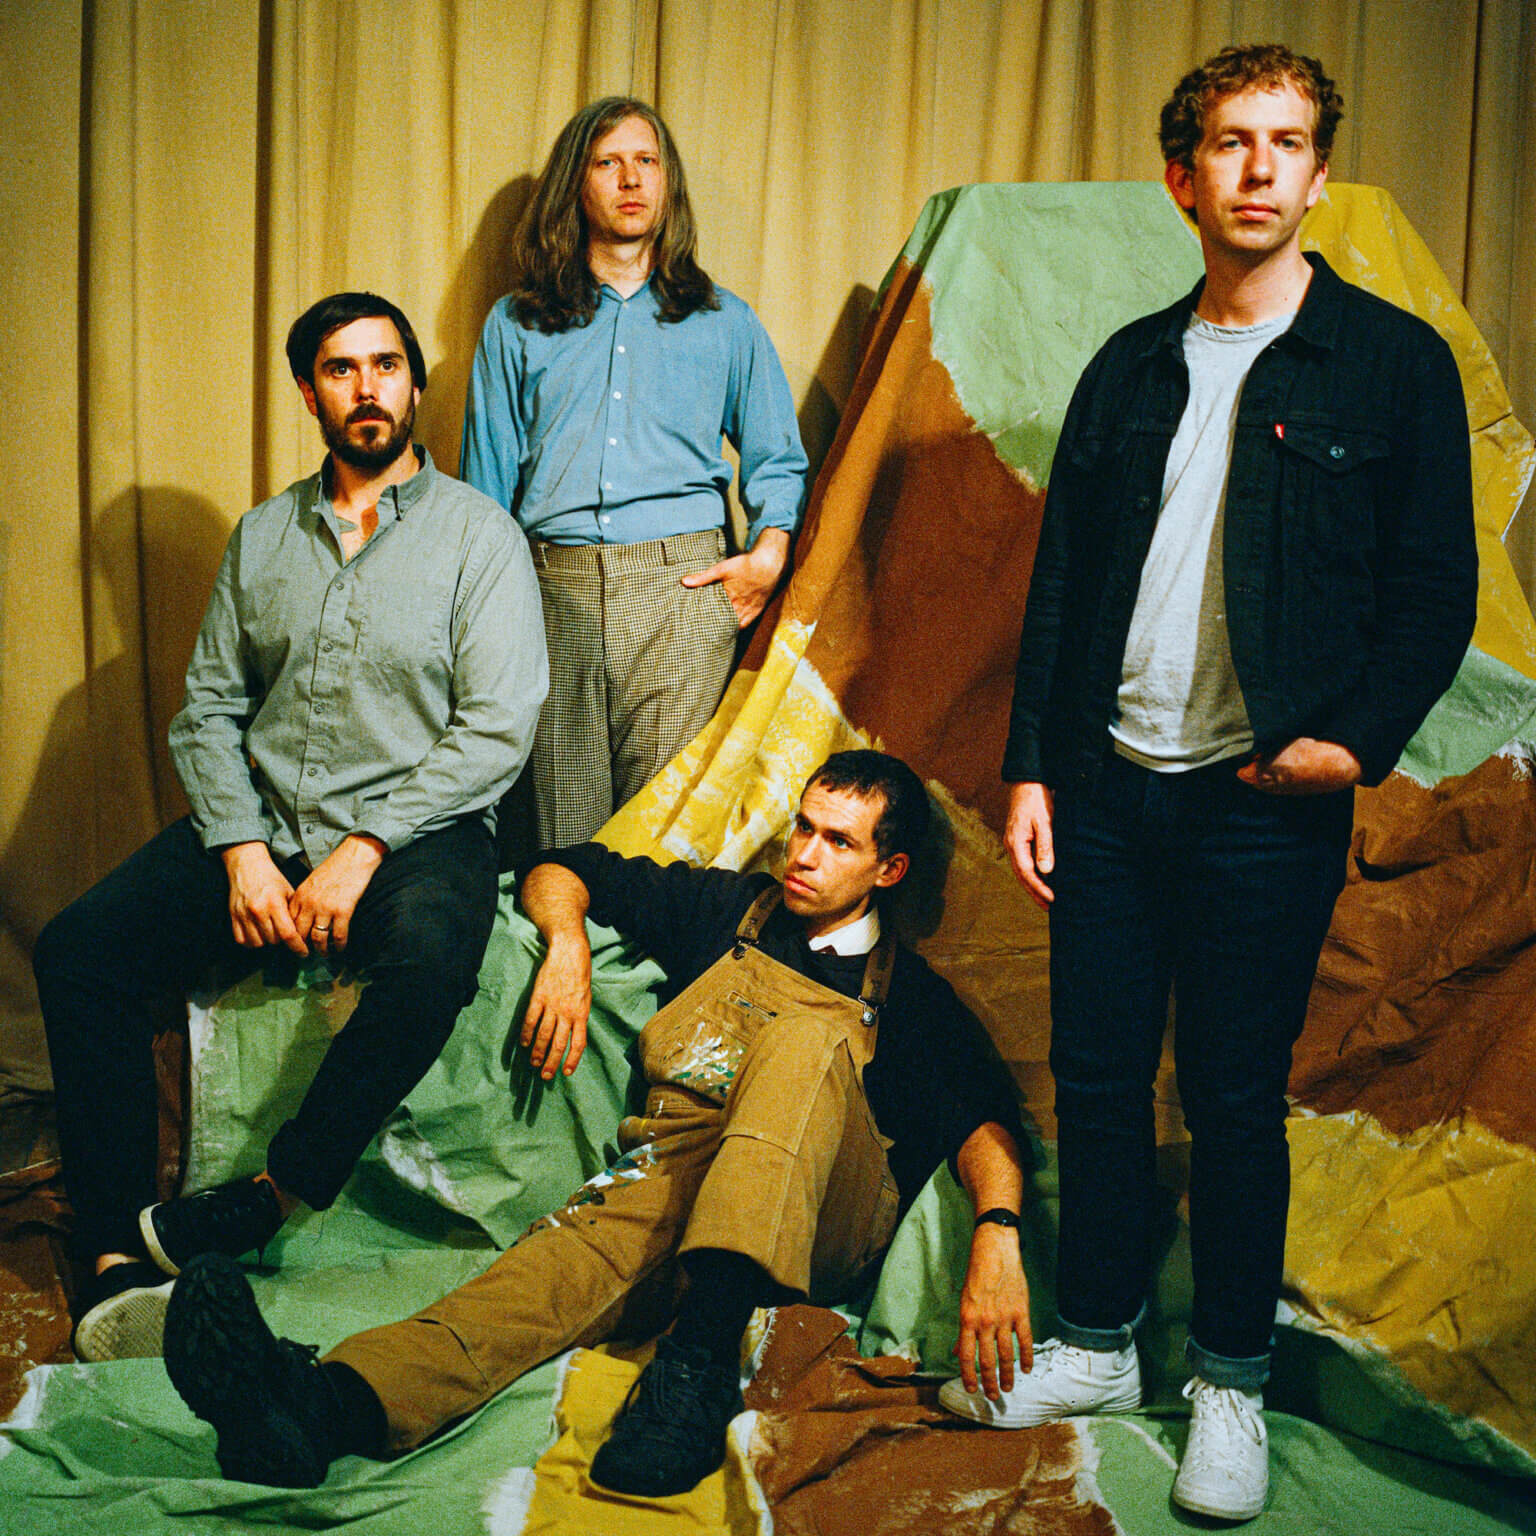 Parquet Courts have announced Sympathy For Life, the band's new full-length, will arrive on October 22nd via Rough Trade Records